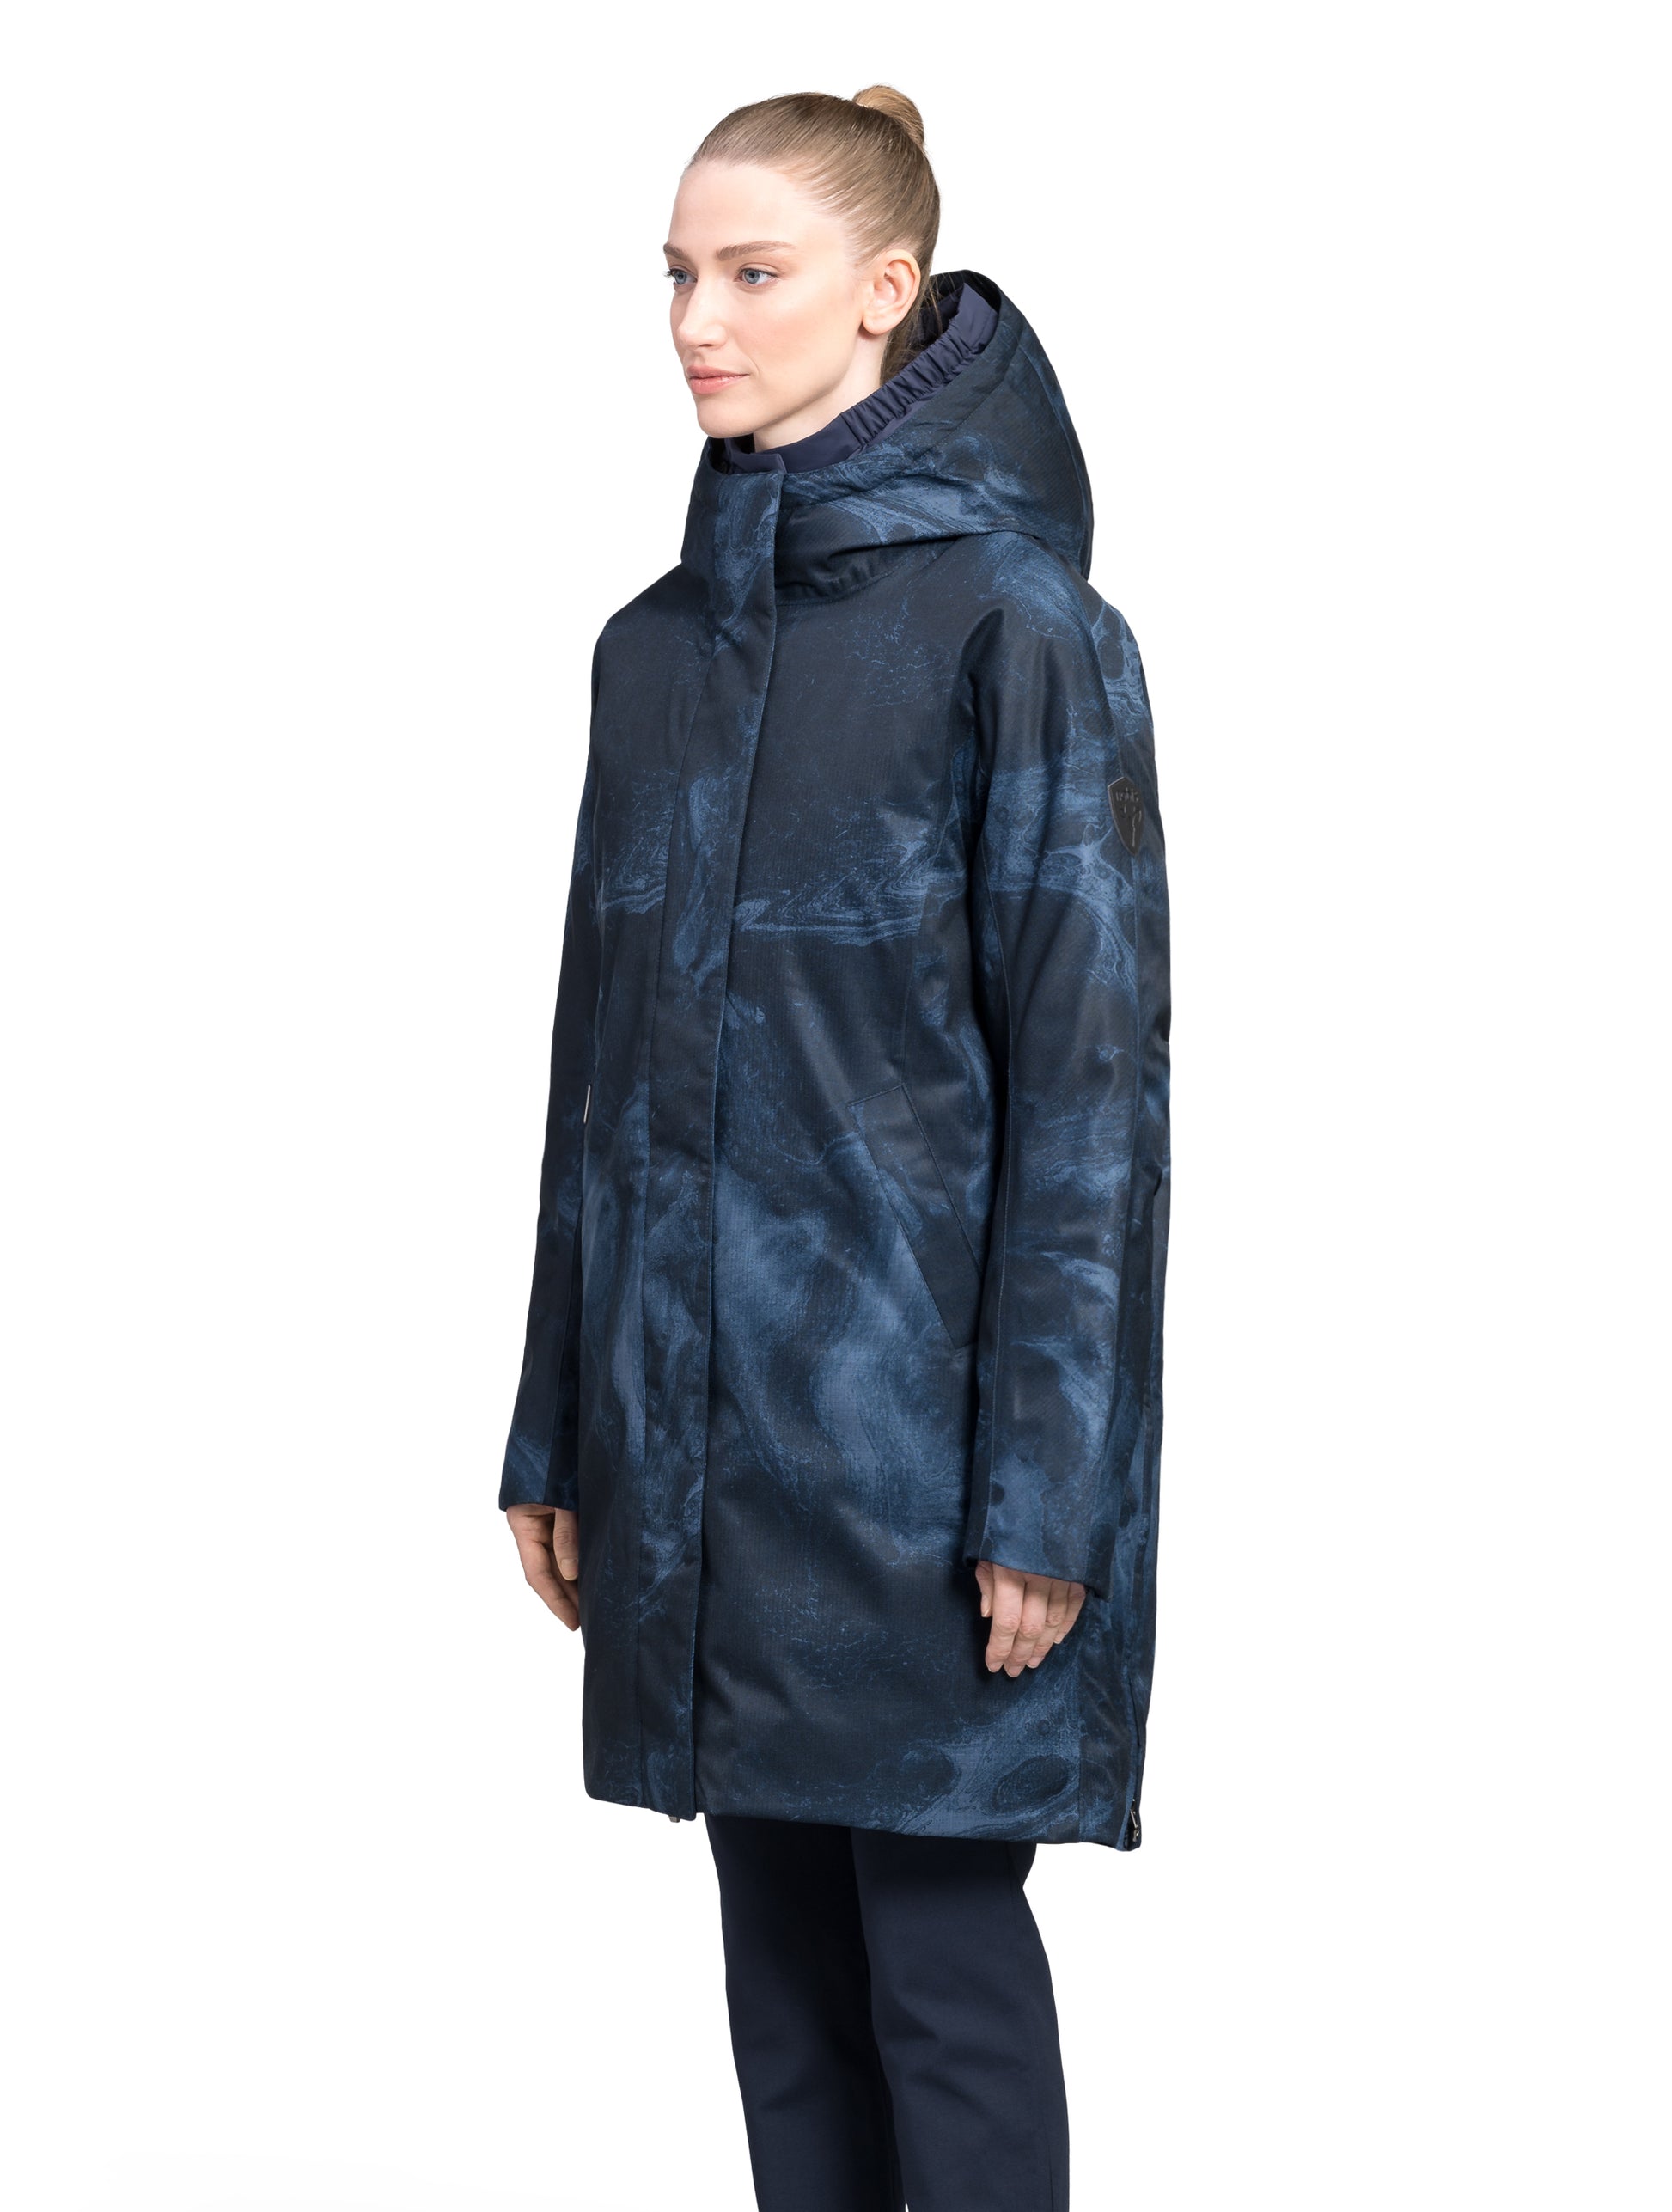 Dory Women's Tailored Back Zip Parka in knee length, premium Crosshatch fabrication, Premium Canadian White Duck Down insulation, non-removable down-filled hood, removable interior hood, centre front two-way zipper with wind flap, vertical zipper detailing along back, in Navy